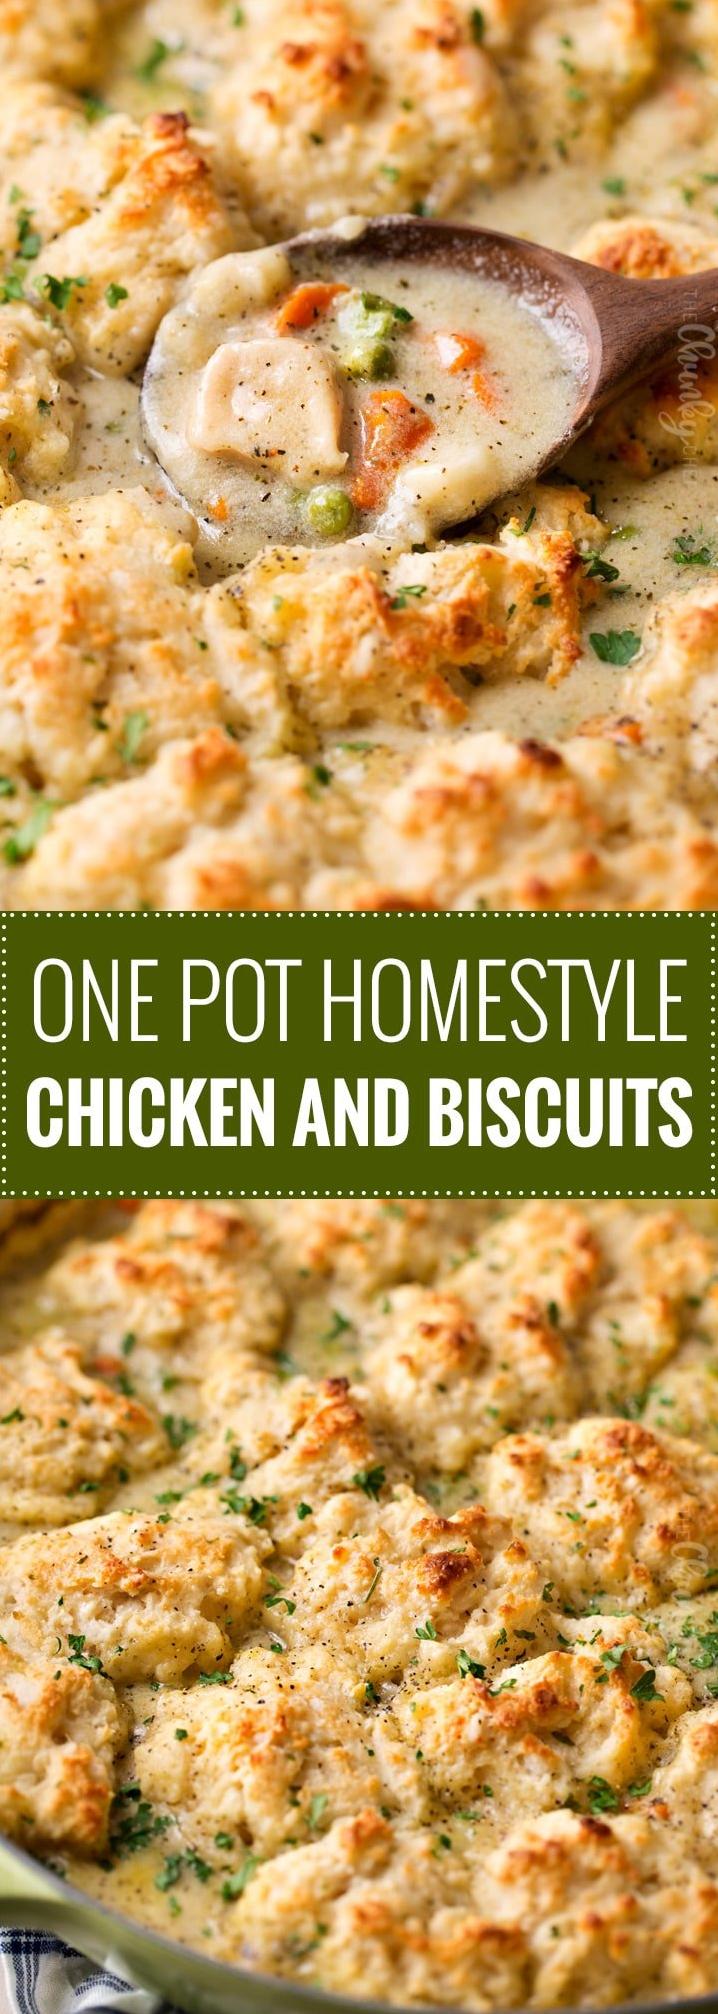  Homemade biscuits offer a flaky, buttery contrast to the savory chicken stew.